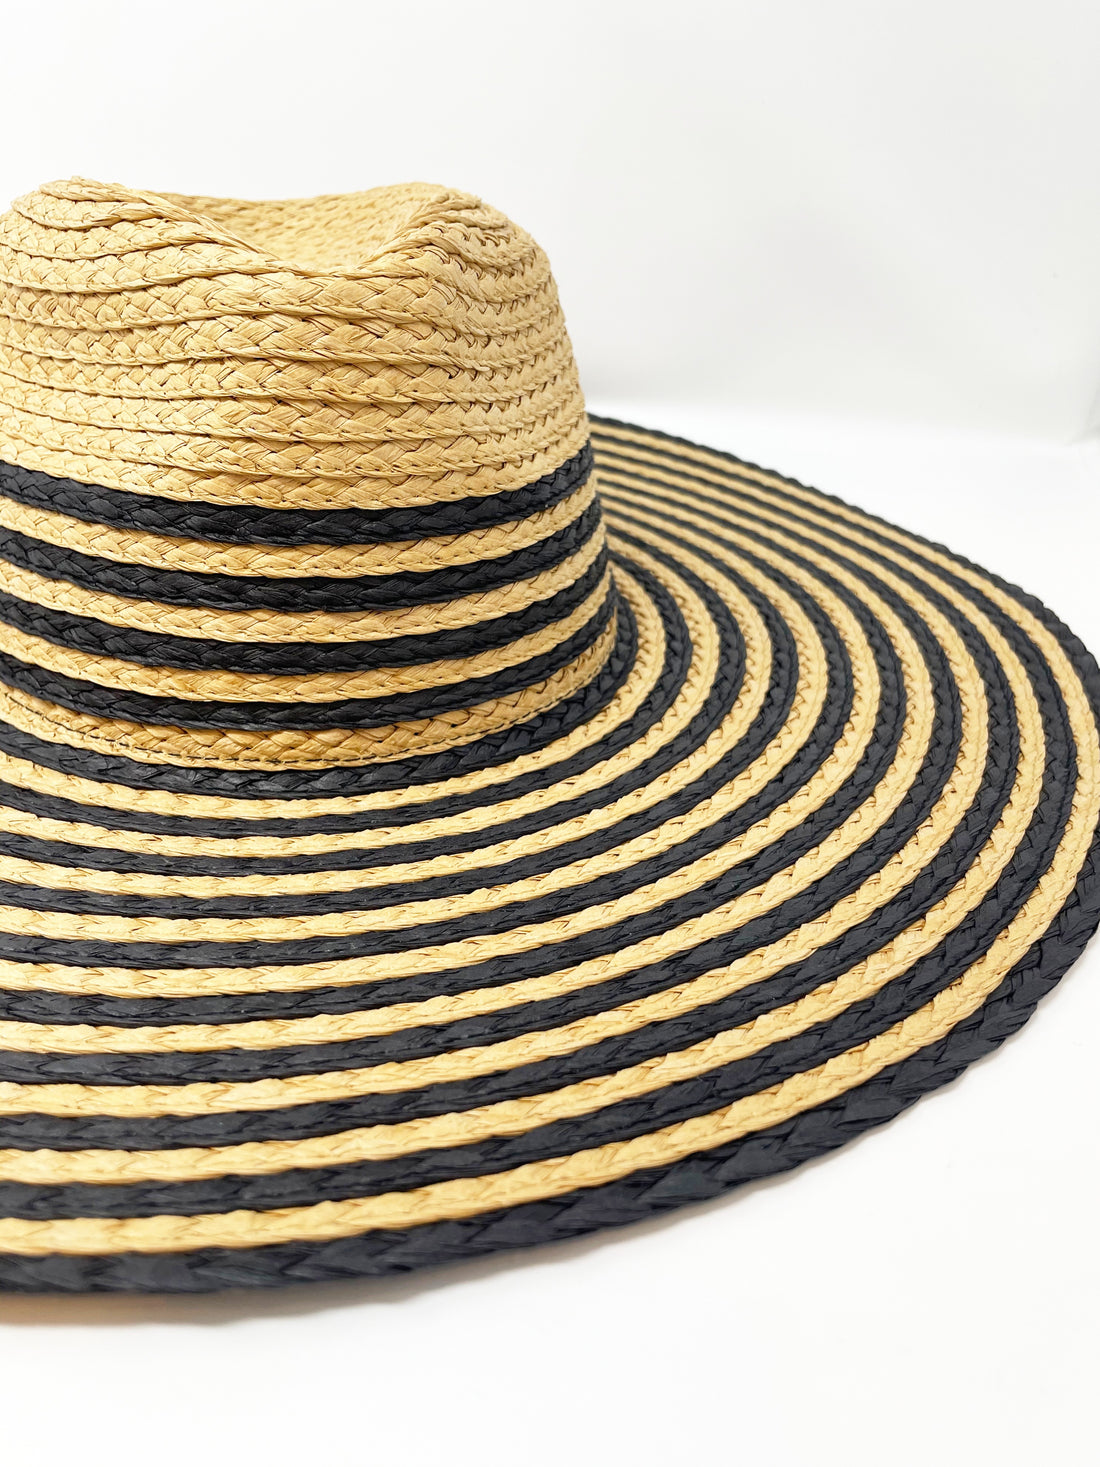 Oversized Foldable and Packable Panama Hat with Navy Stripe